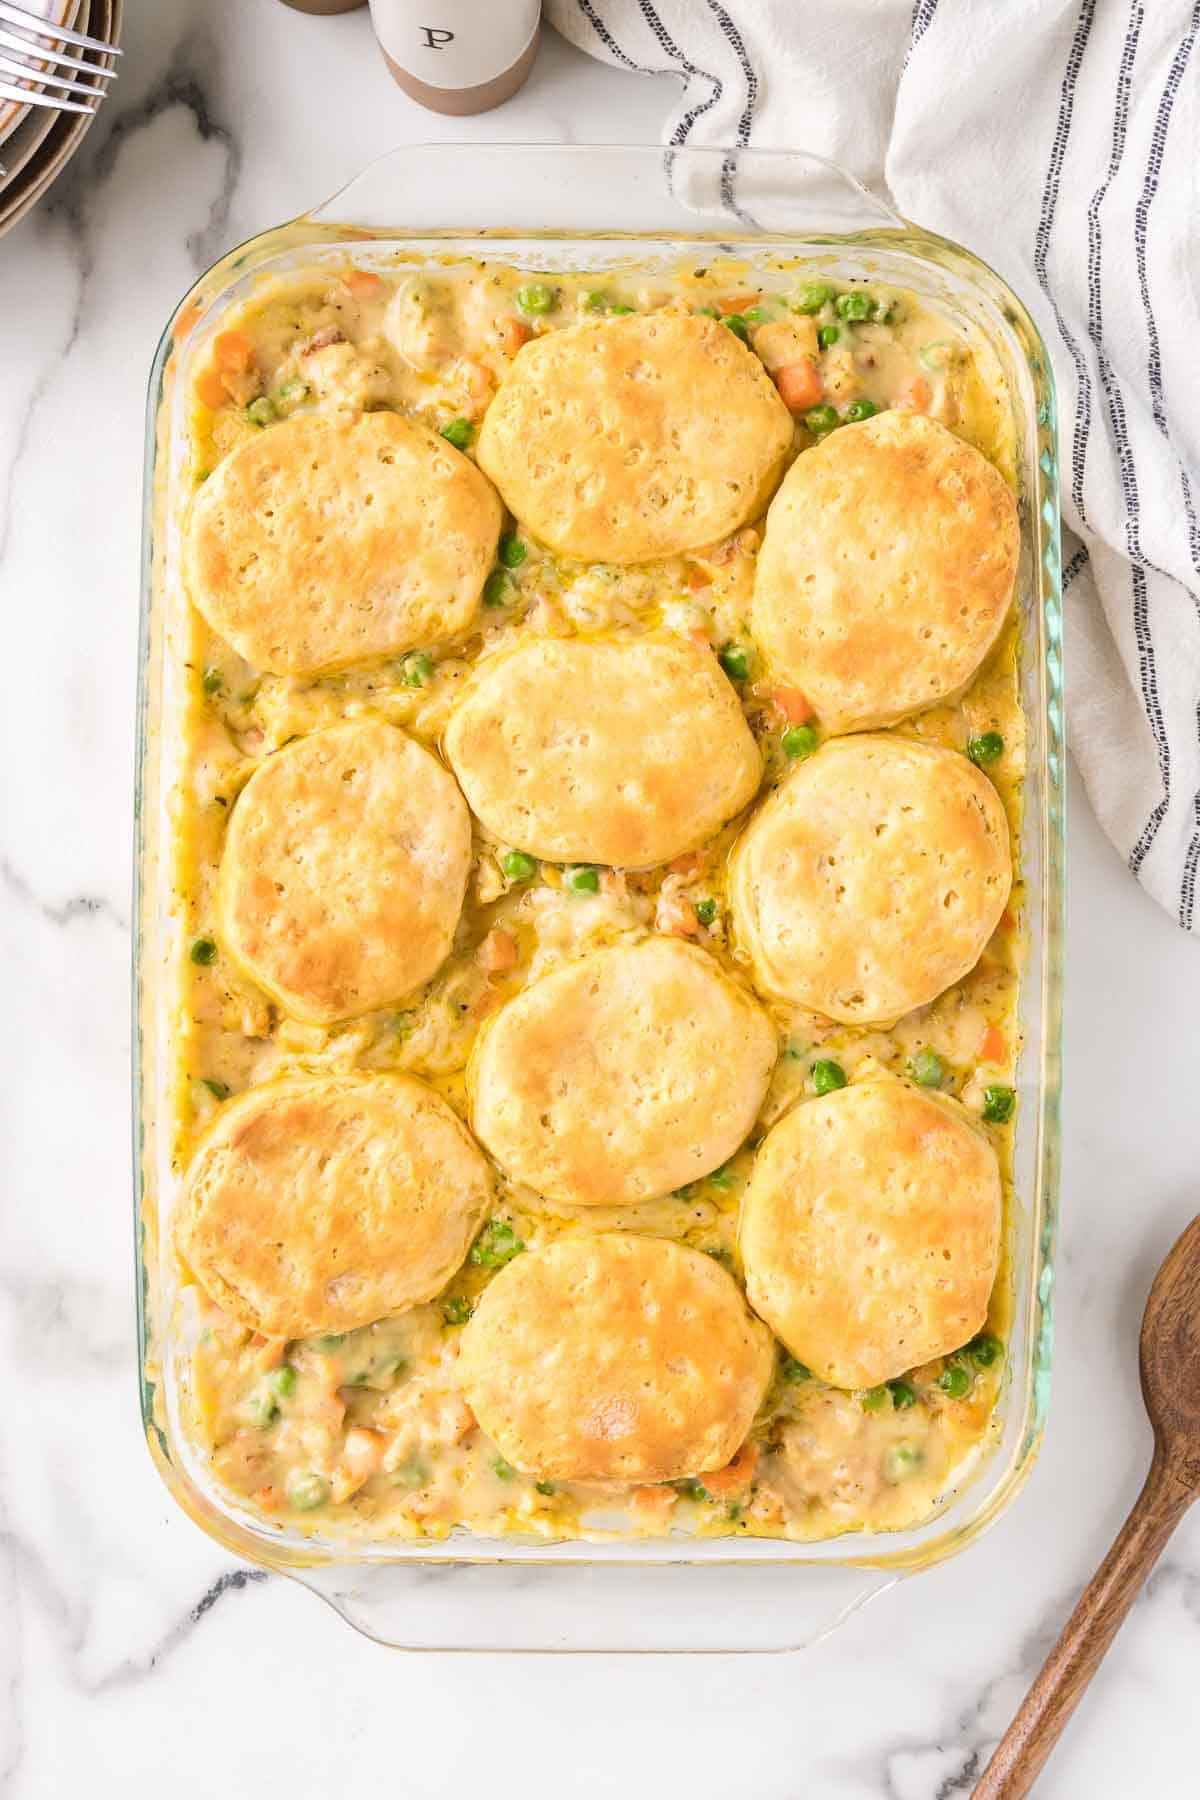 Chicken pot pie casserole is baked until the biscuits are golden